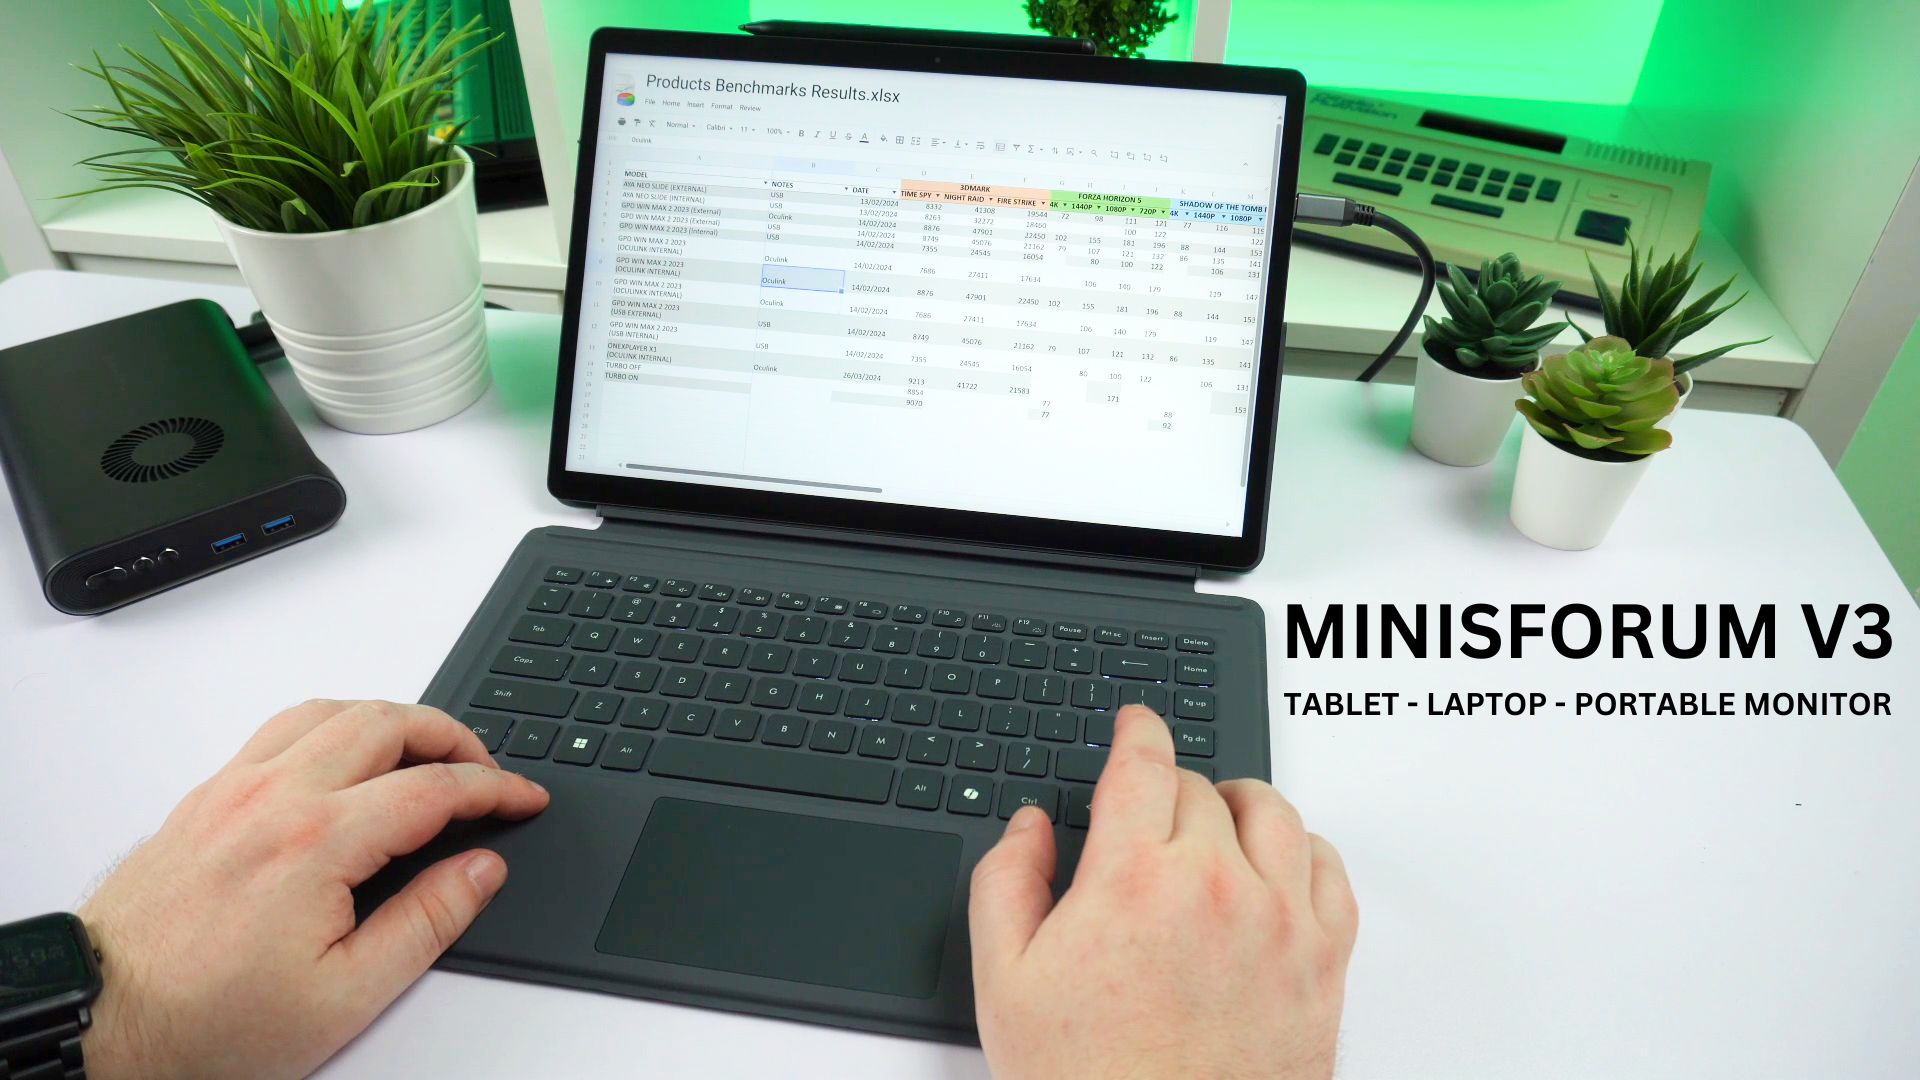 Minisforum V3 review with video – 3-in-1 tablet, laptop and portable monitor with AMD Ryzen 7 8840U CPU